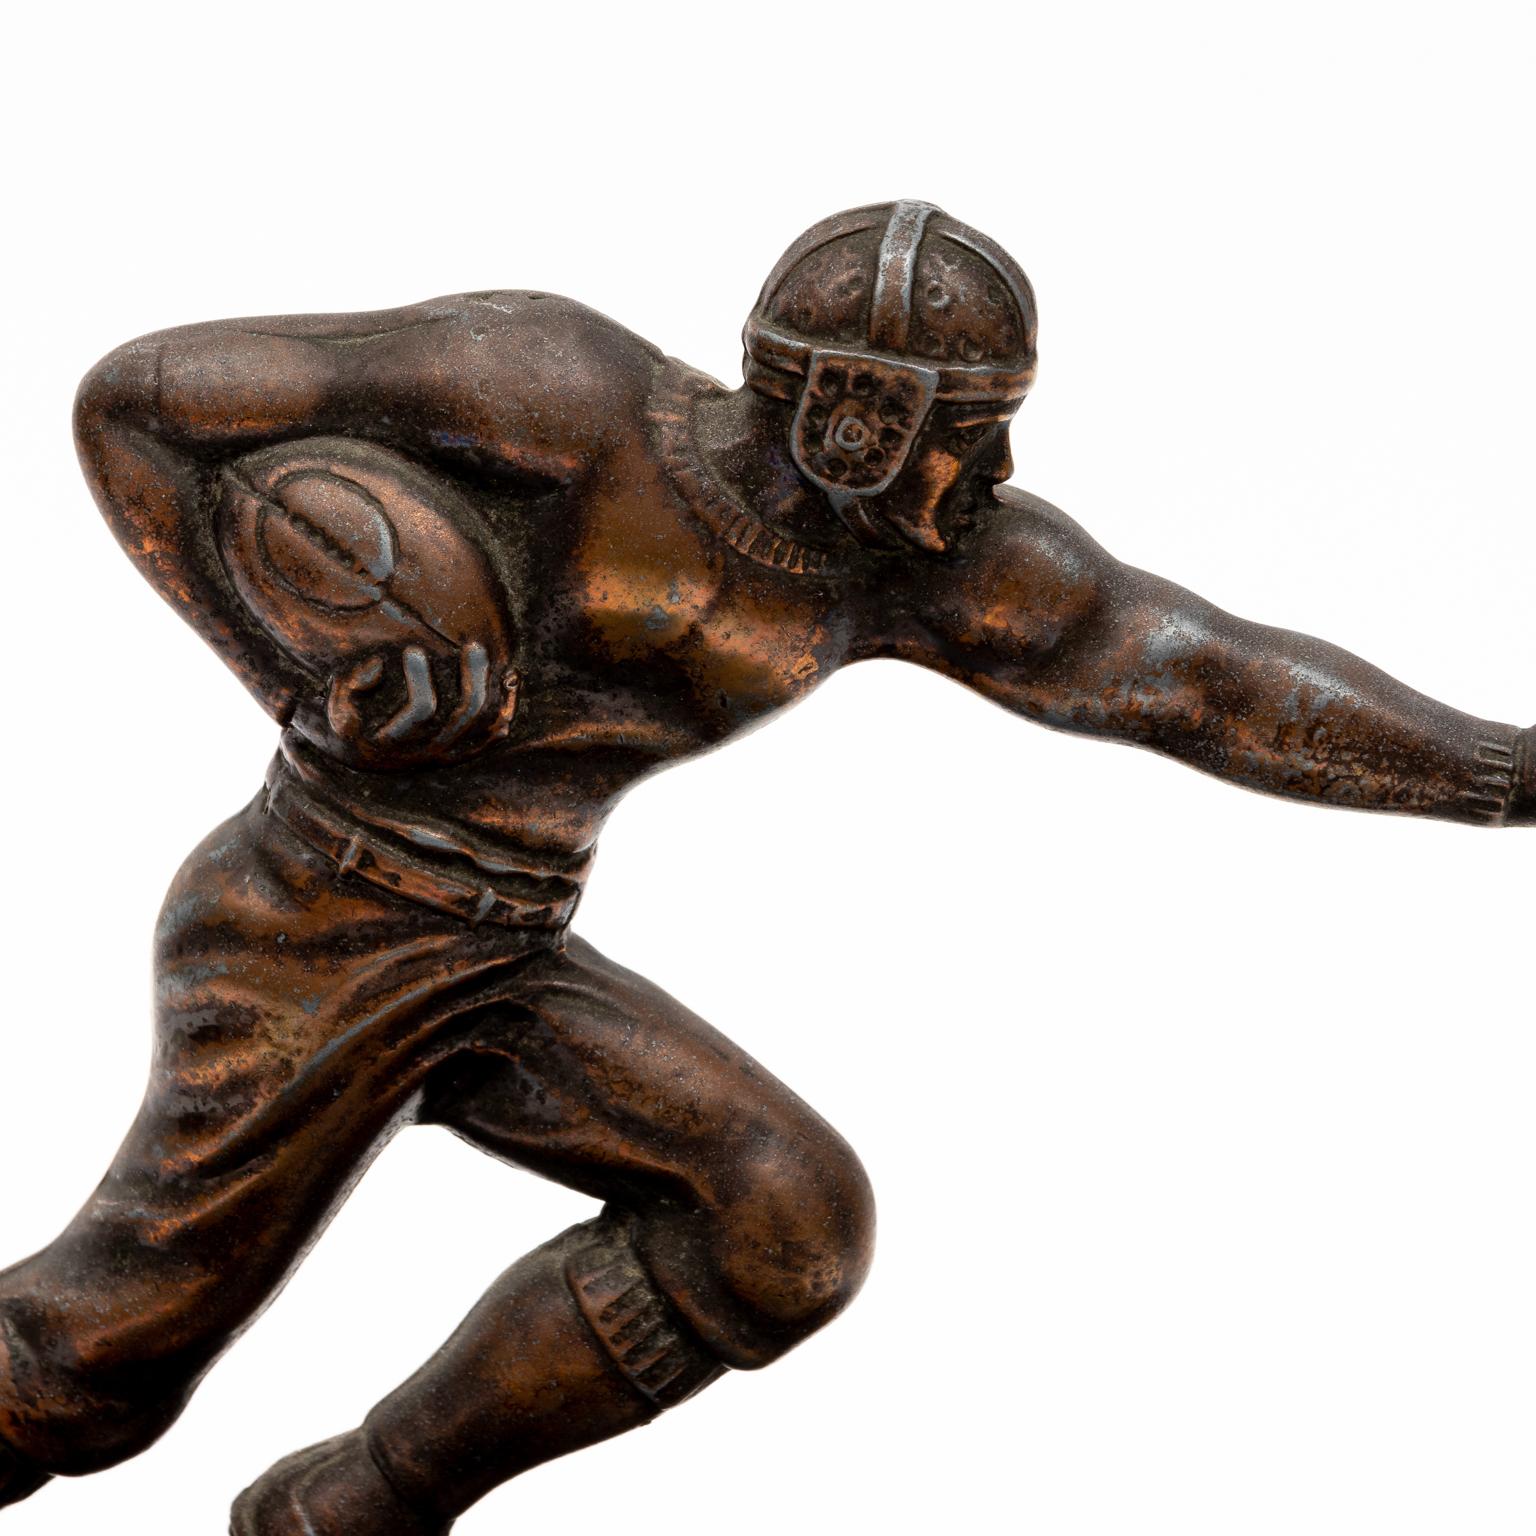 Circa 1920-1930s rare football mascot car radiator cap or hood ornament in cast metal. The piece looks like a pre-Heisman trophy style stance with left arm up and right arm tucked. The football player is wear a vented dog eared helmet with leather